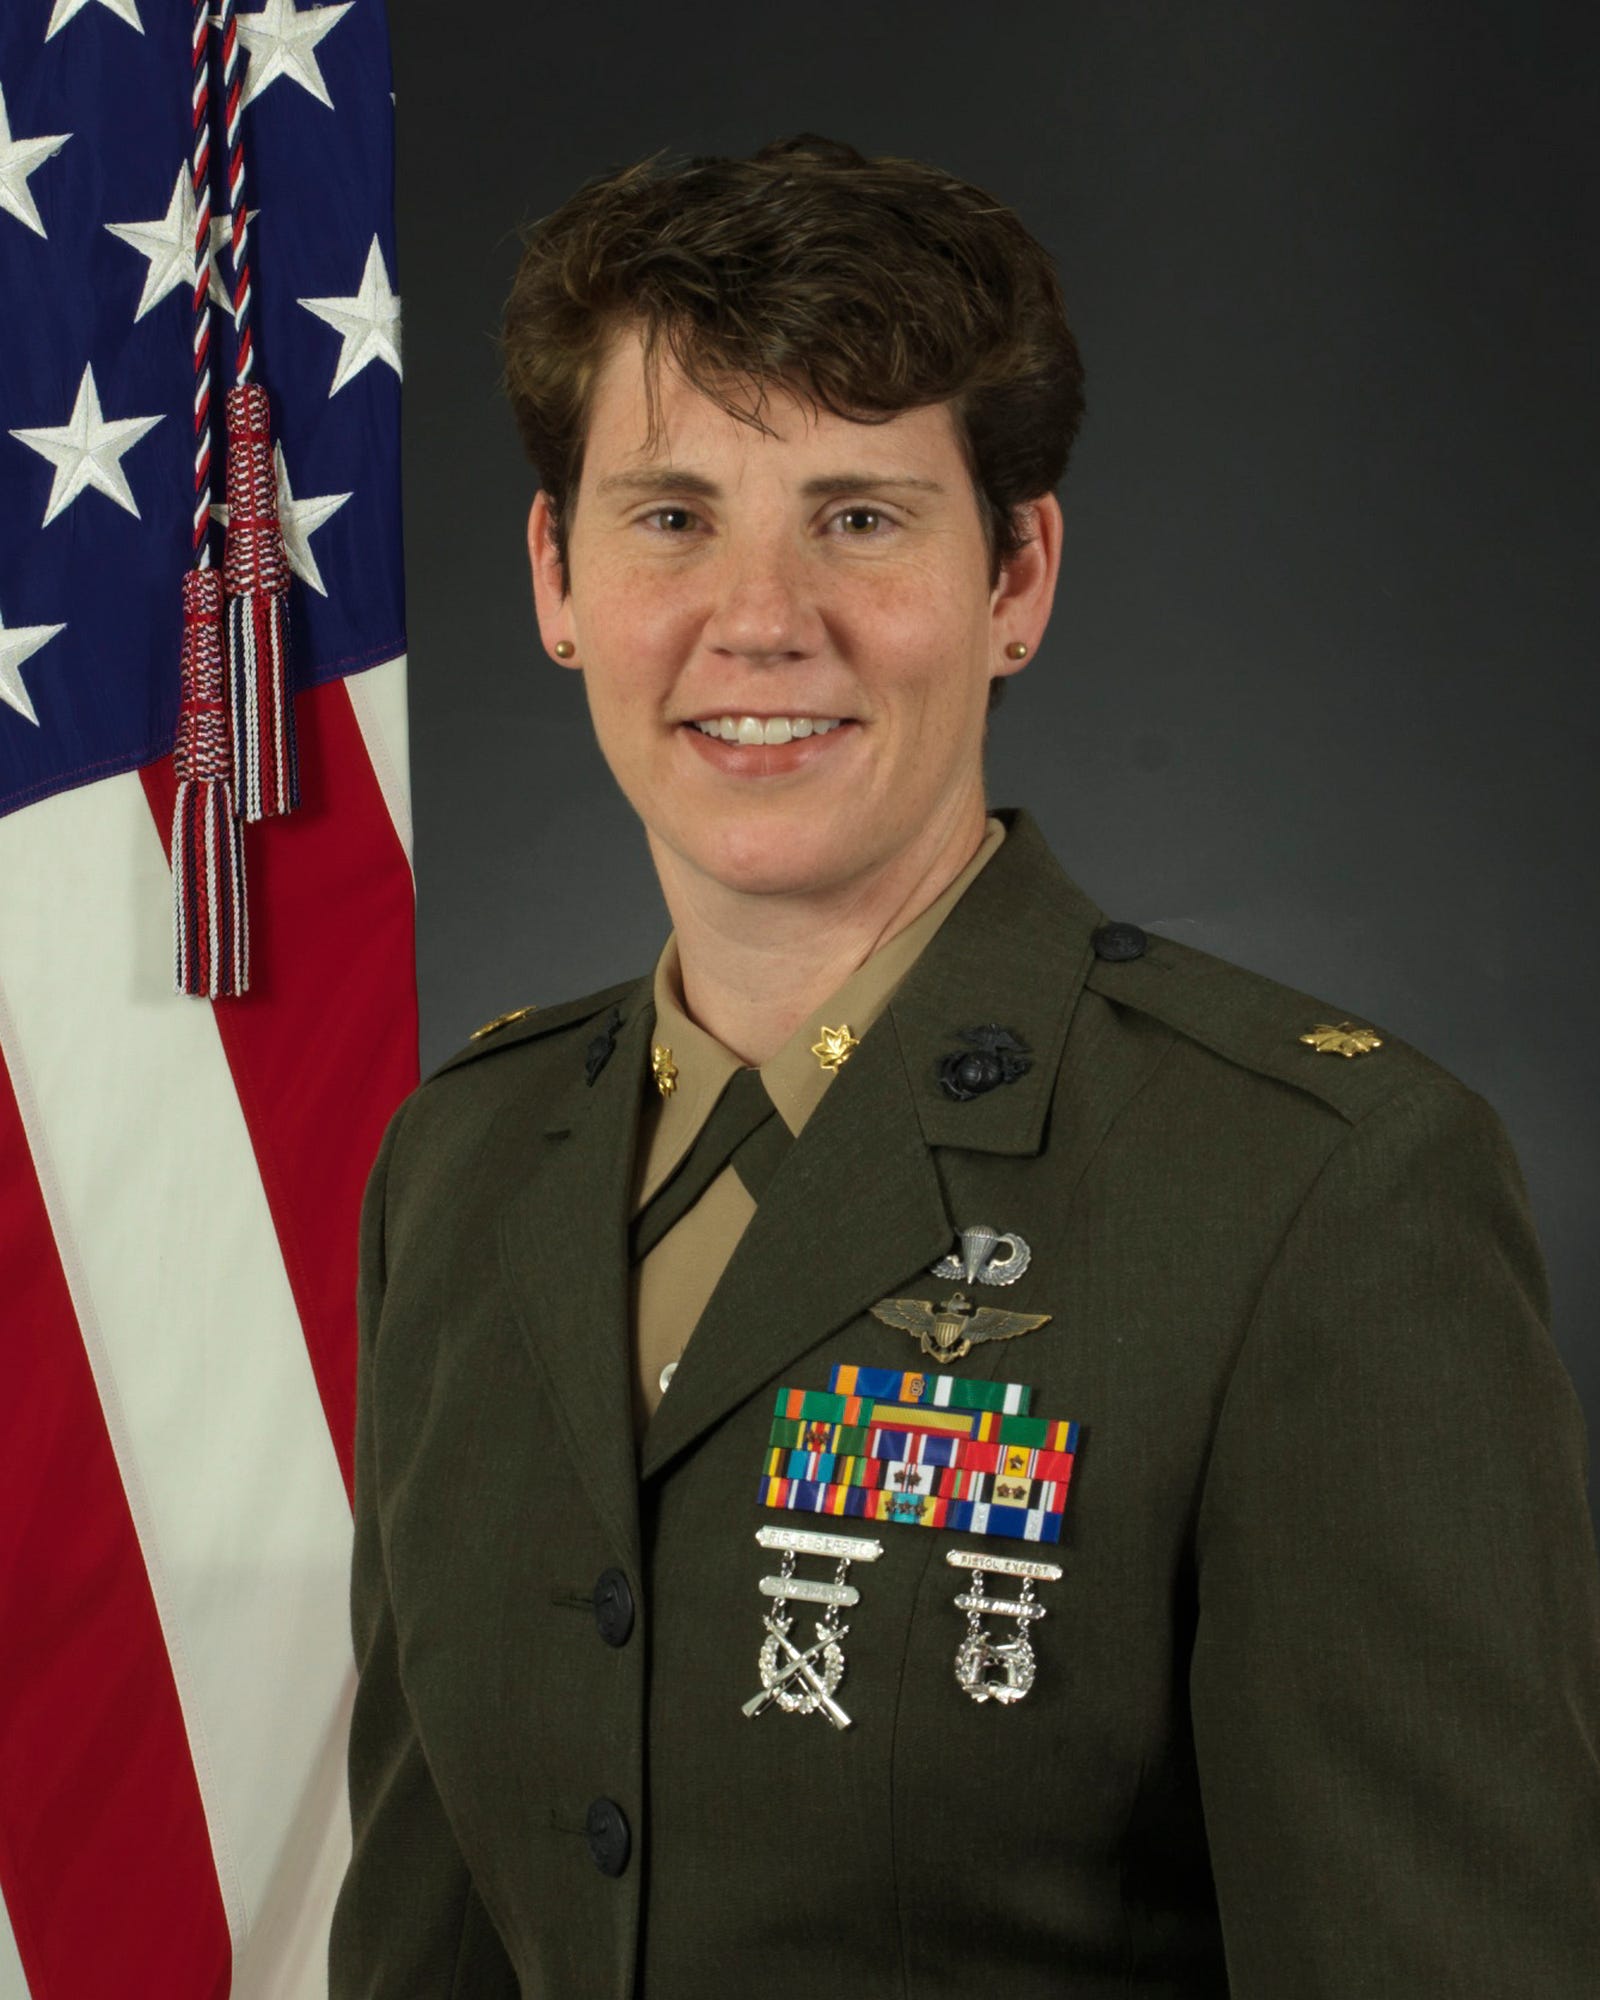 Amy McGrath is MARRIED To a MAN